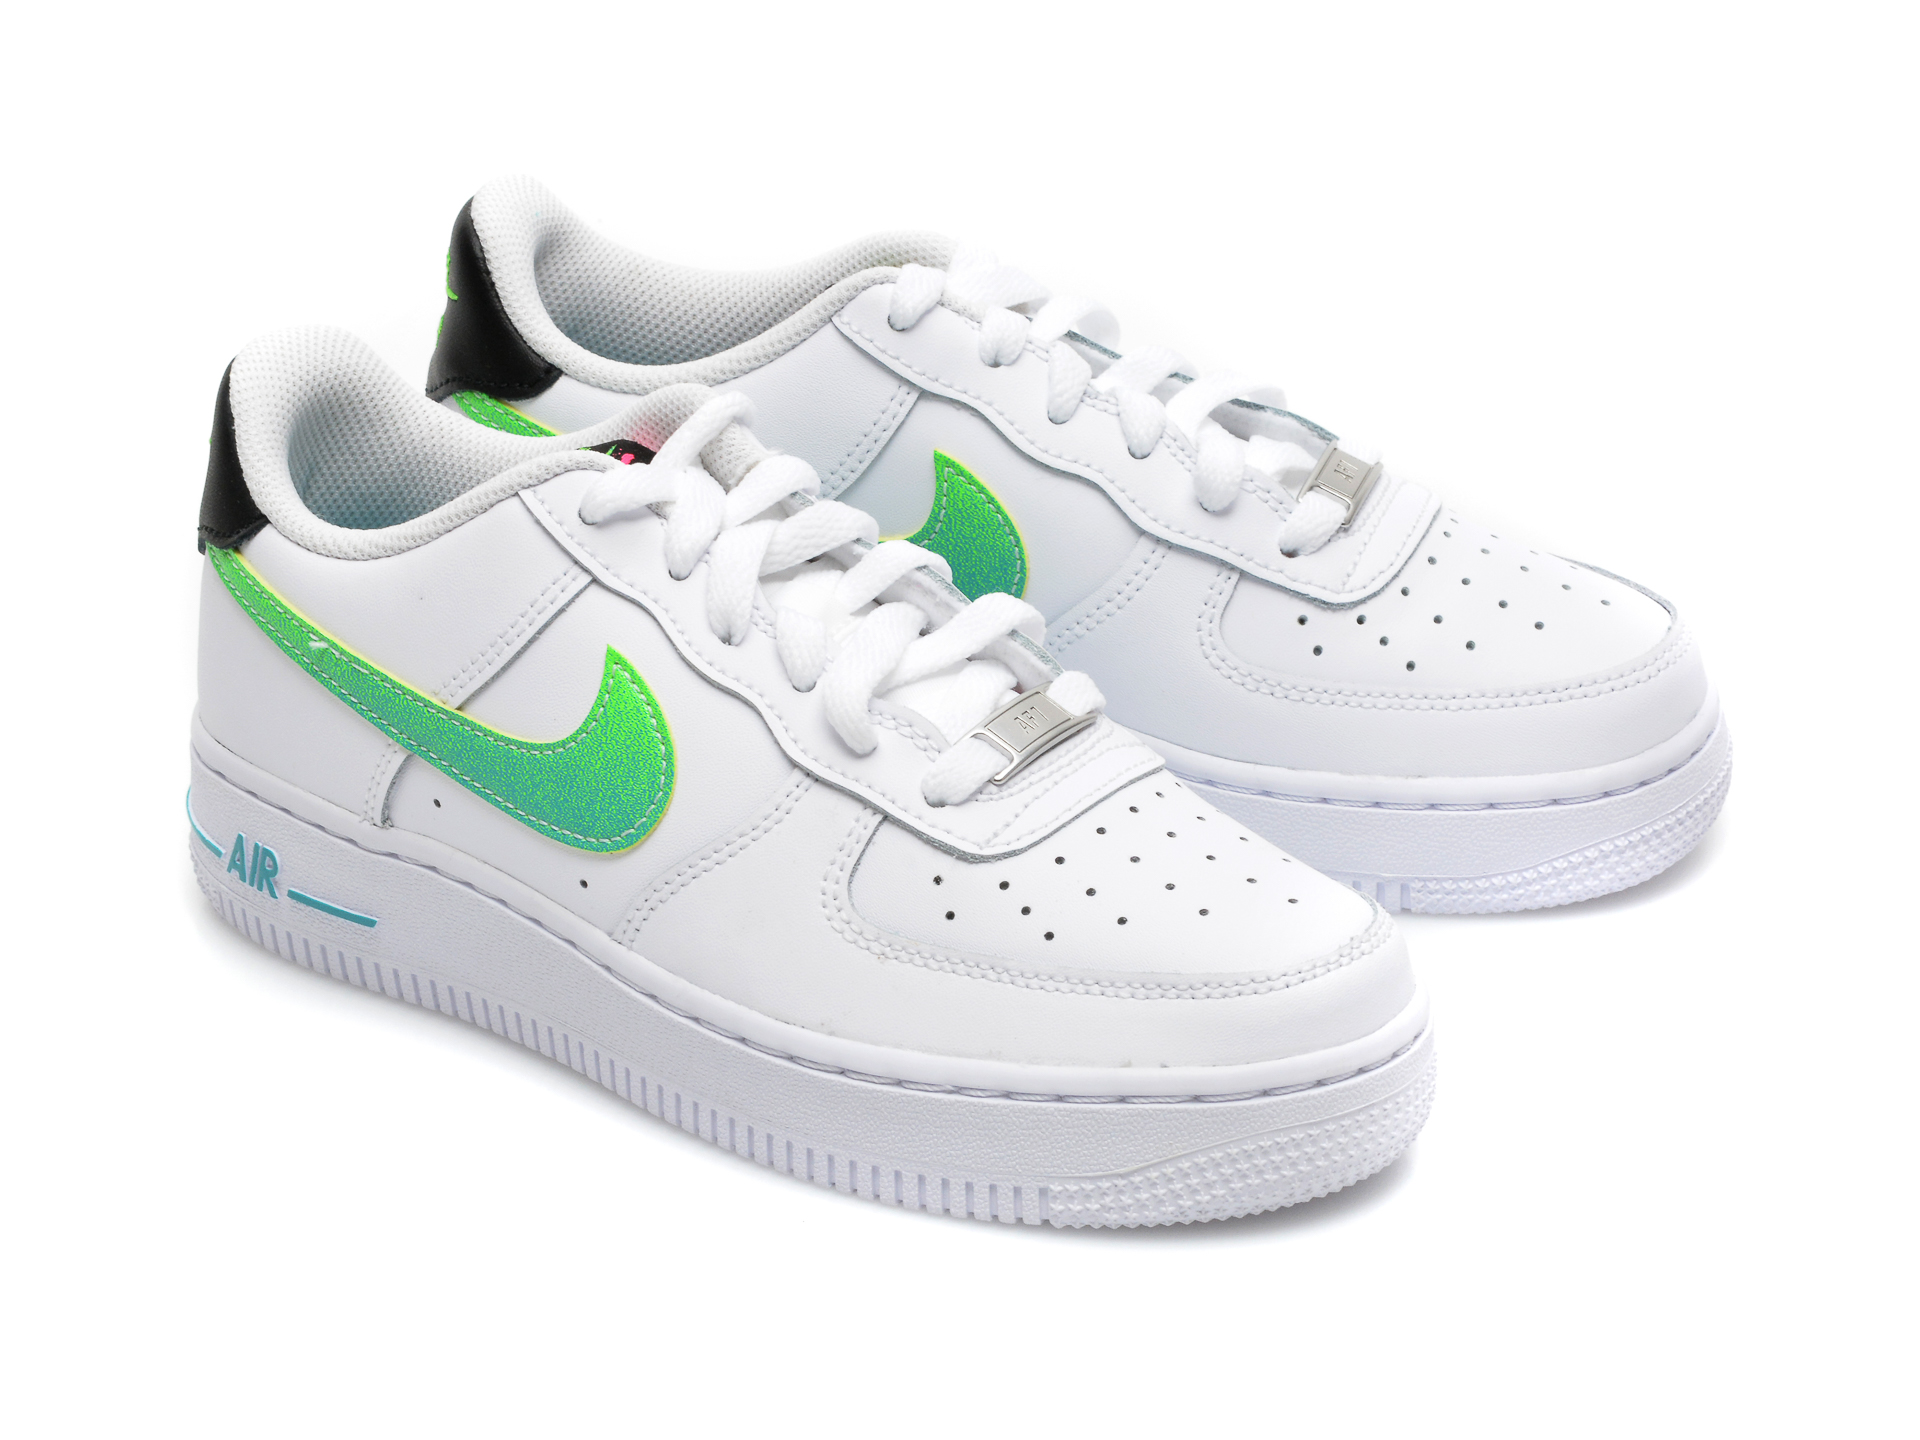 Ananiver Sweep highlight Pantofi sport NIKE albi, AIR FORCE 1 LV8 1 (GS), din piele ecologica - Shop  Clopotel.ro